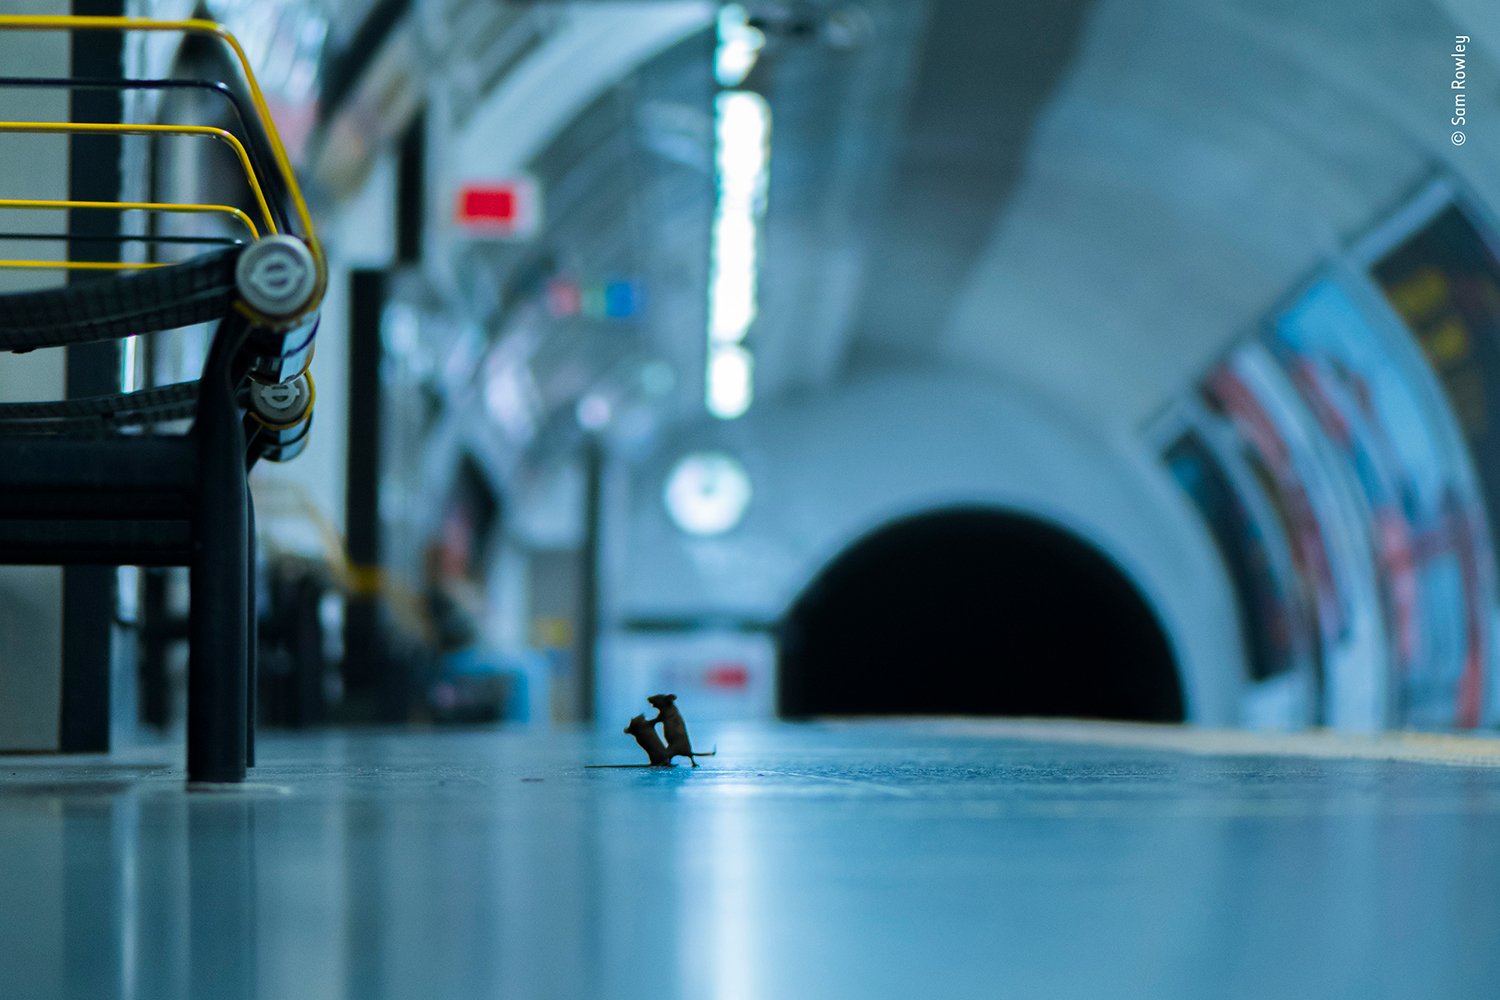 Station Squabble: The Story Behind This Incredible Photo of Two Mice Fighting